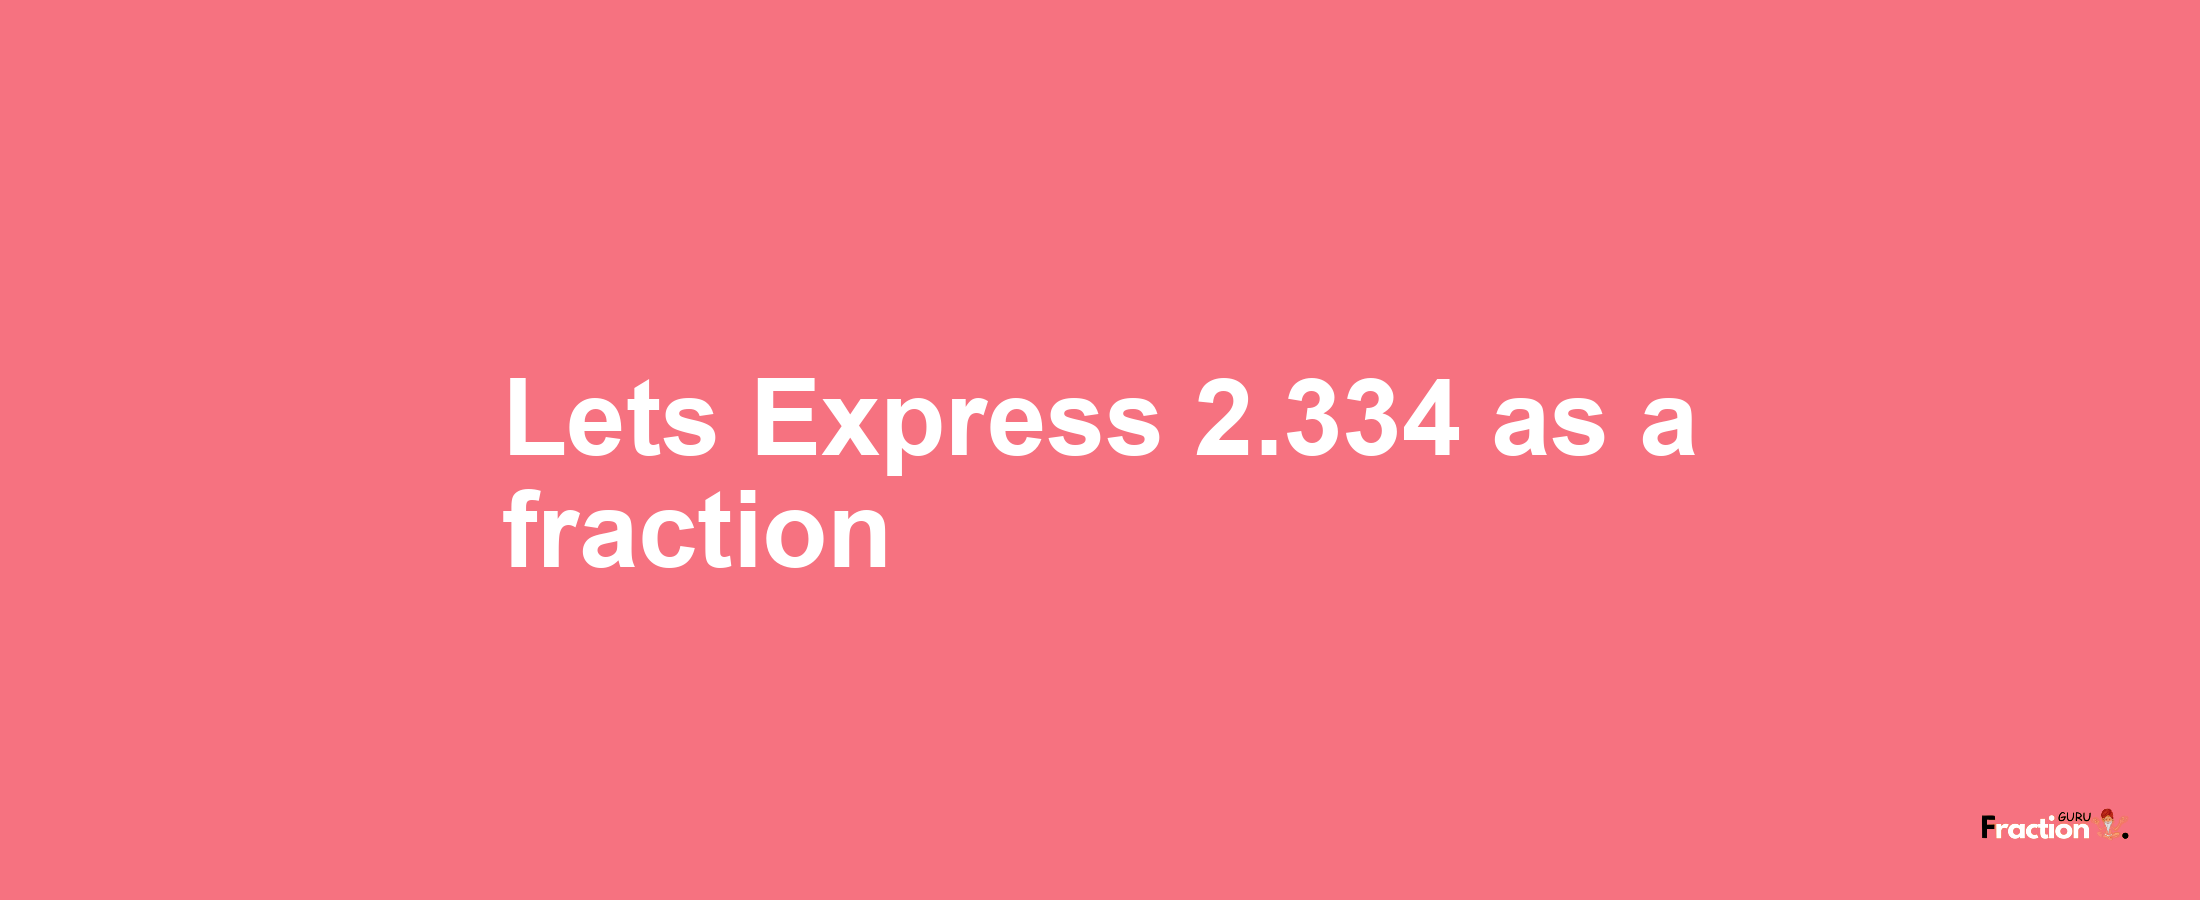 Lets Express 2.334 as afraction